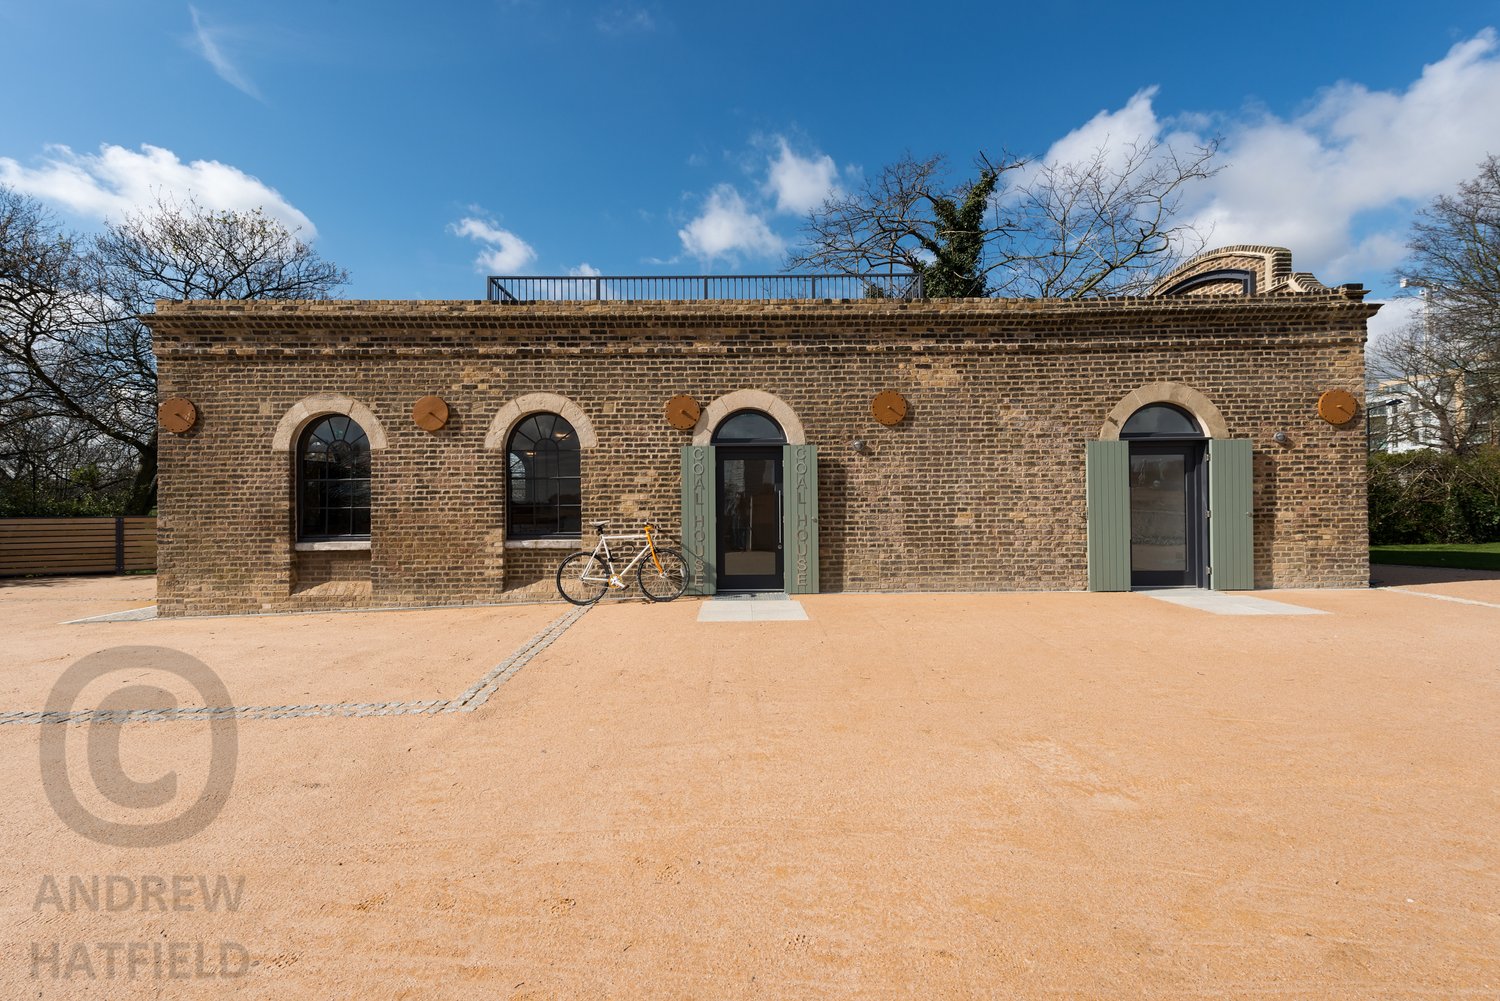 Architectural+image+award+winning+Coal+House+cafe+conversion+Woodberry+Wetlands+Stoke+Newington+brick+front+elevation+arched+windows+blue+sky+by+Andrew+Hatfield+architectural+photography+London+AH8_8935.jpg